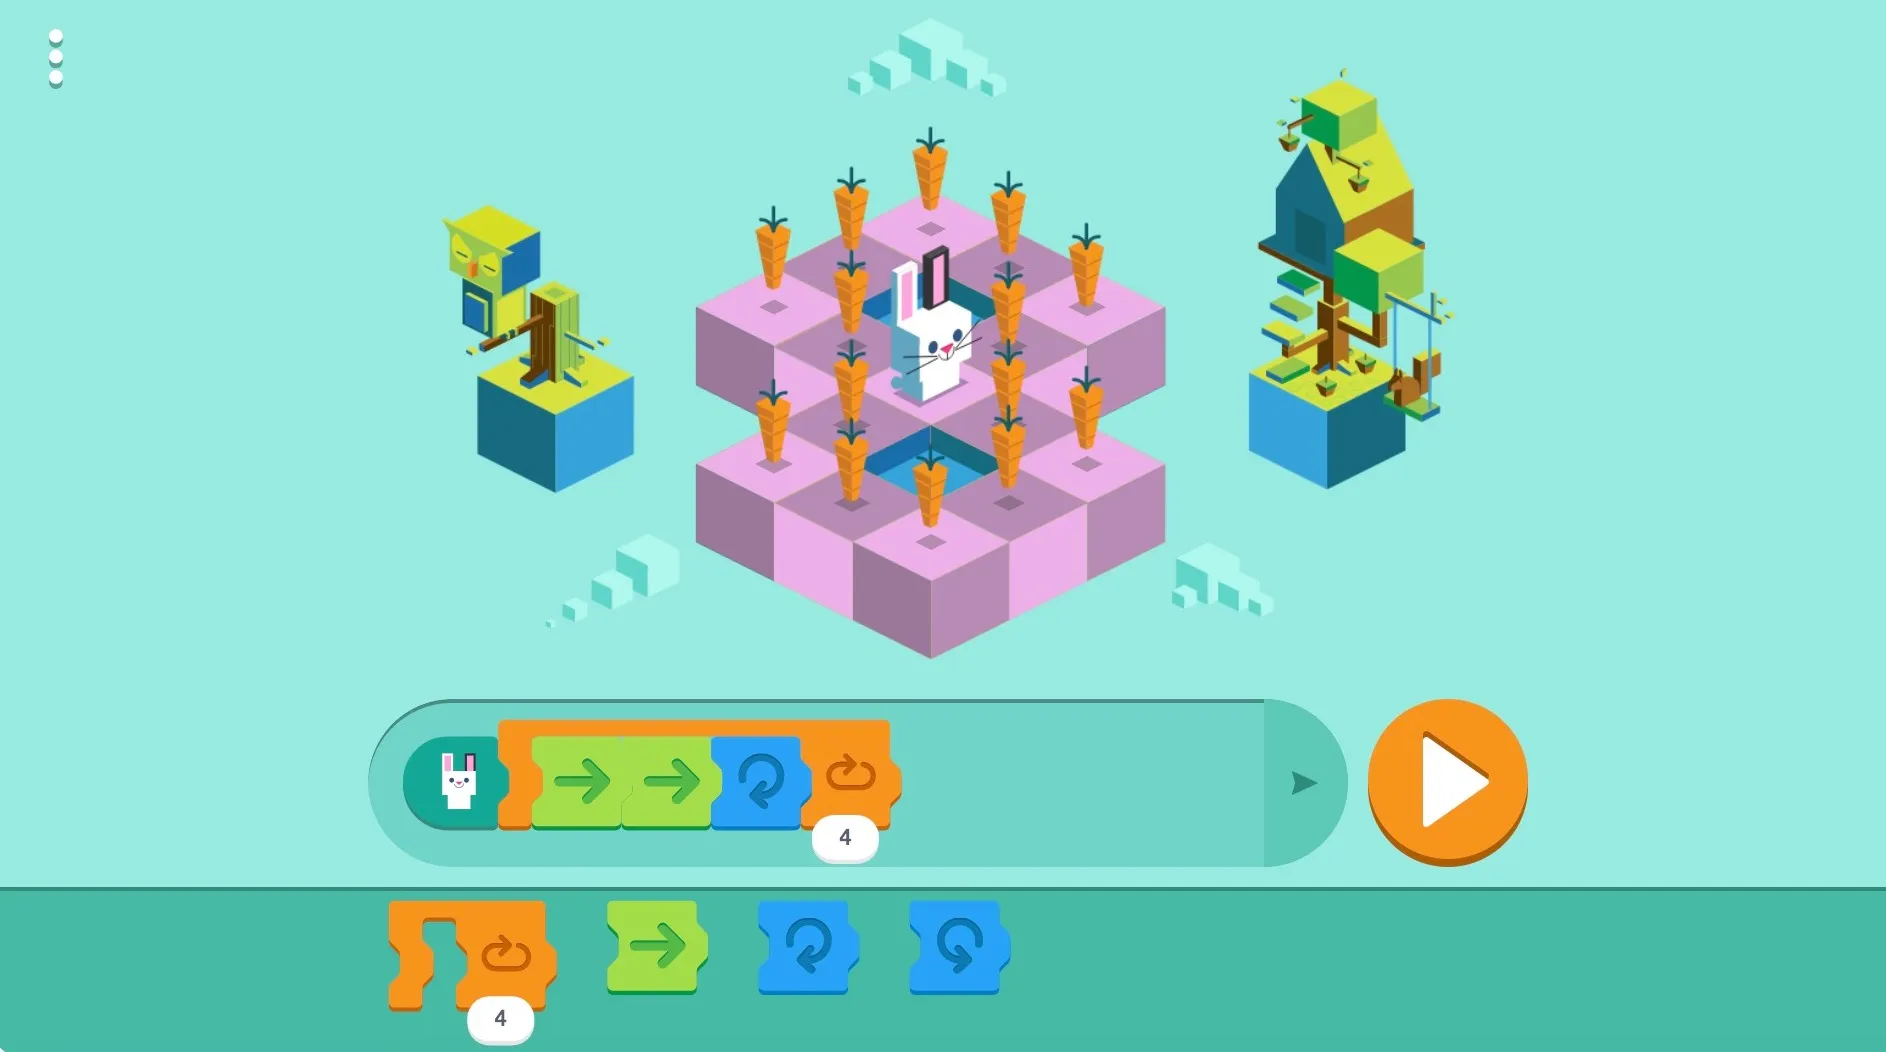 Google re-releasing some of its most popular Google Doodle games, today is  'Coding for Carrots' 